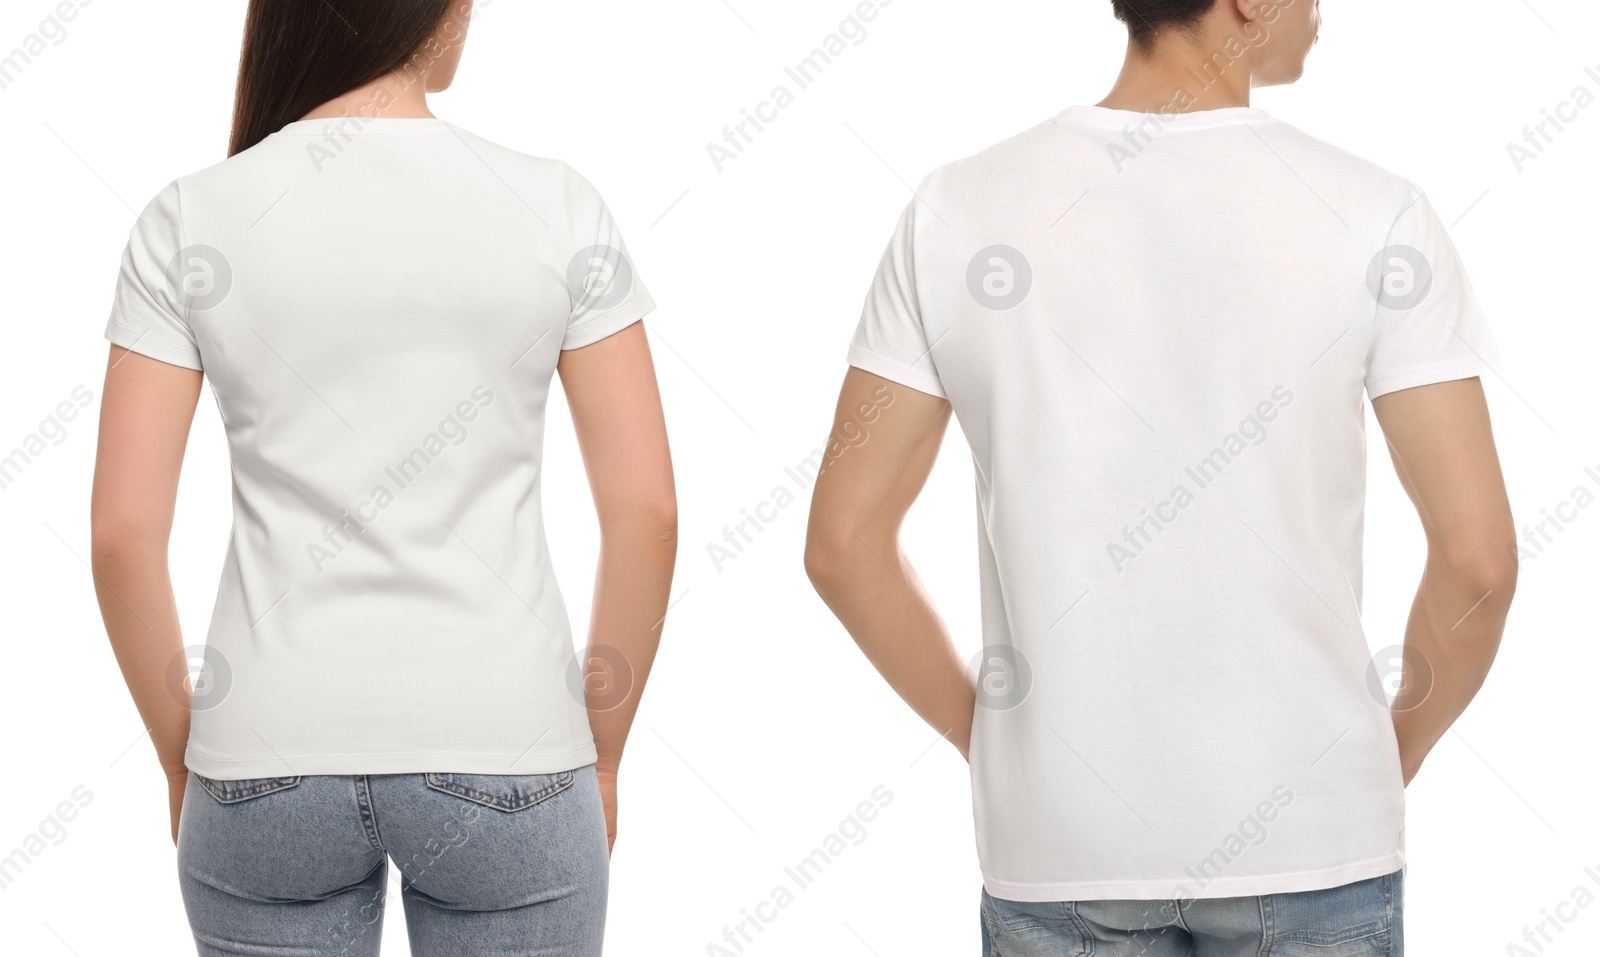 Image of People wearing casual t-shirts on white background, back view. Mockup for design